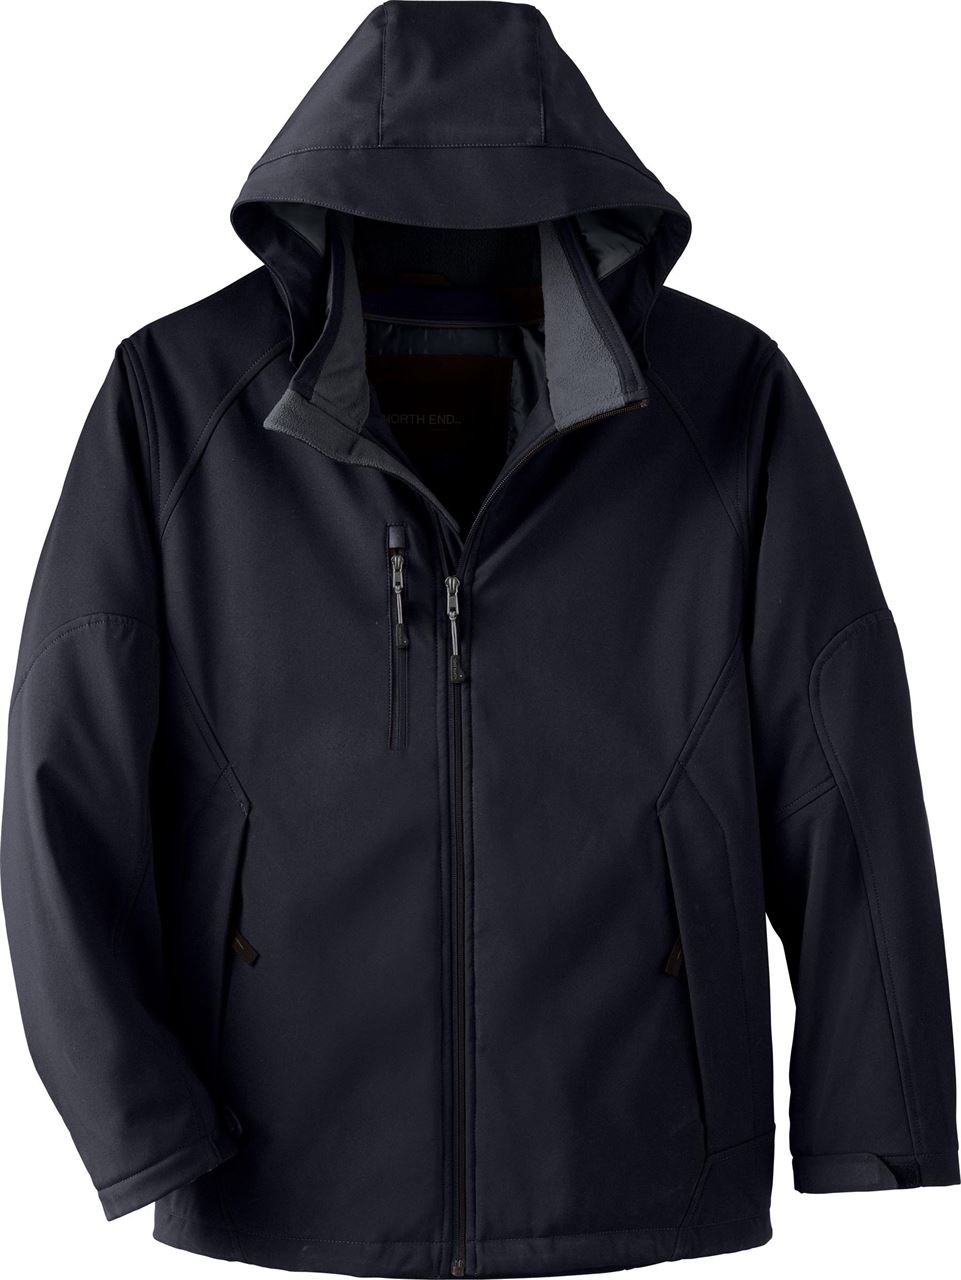 Picture of North End Men's Glacier Insulated Three-Layer Fleece Bonded Soft Shell Jacket with Detachable Hood